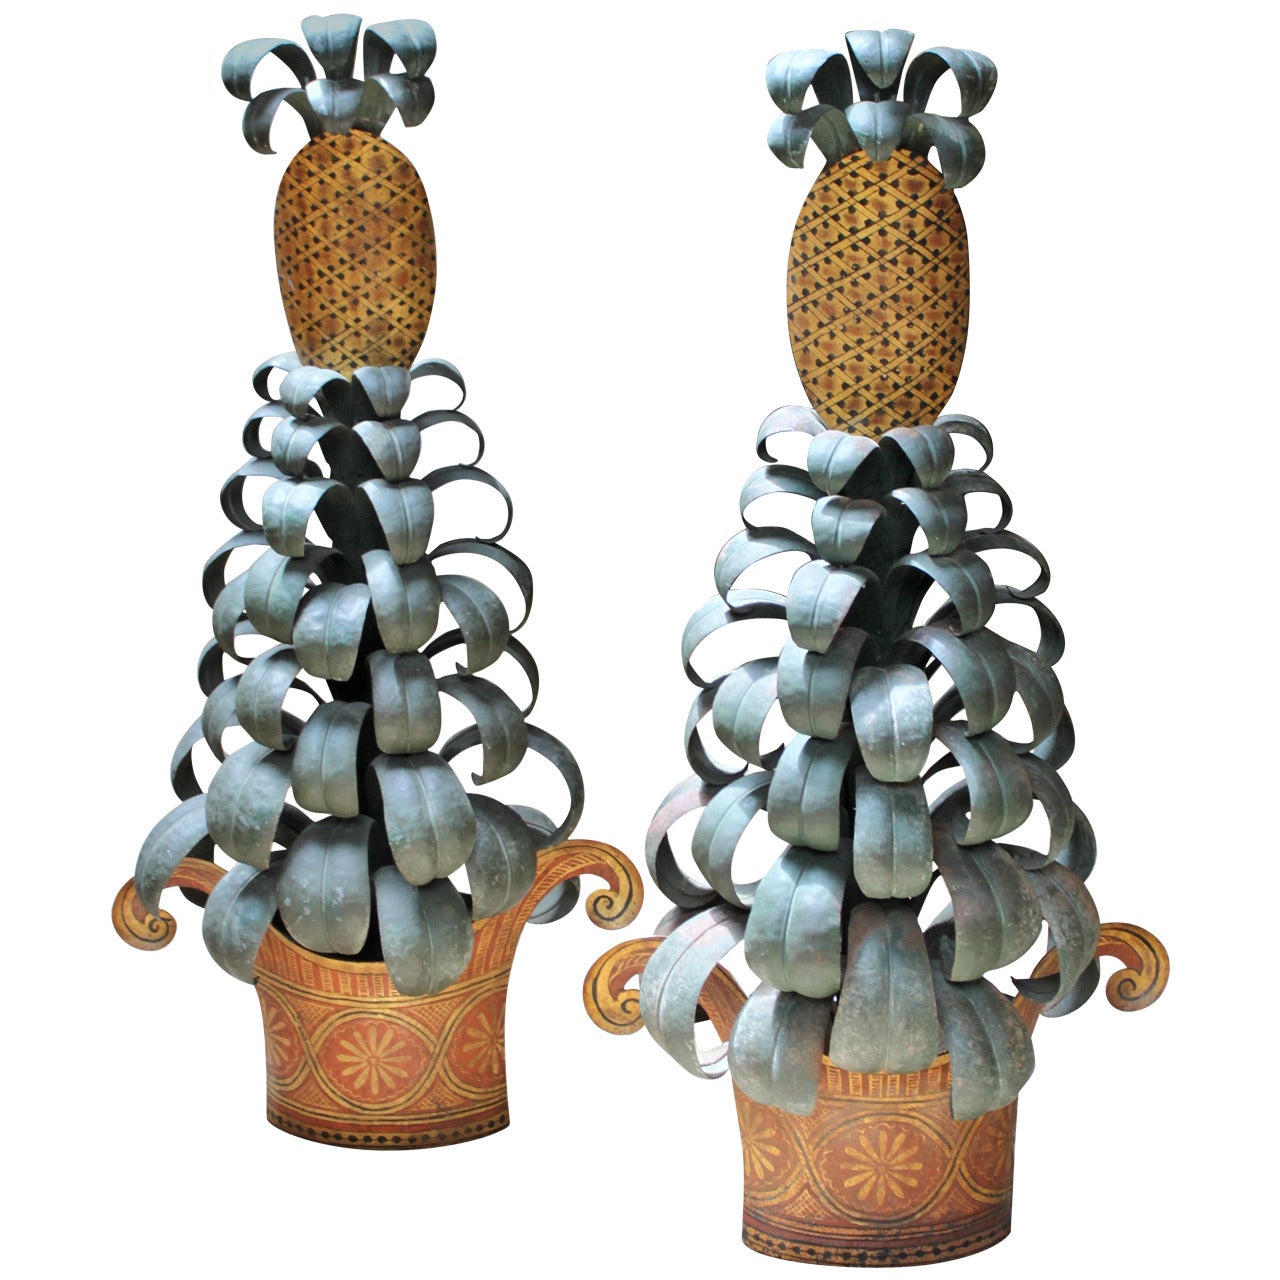 Pair of Vintage Large Tole Polychrome Decorated Pineapple Scone Lamps For Sale